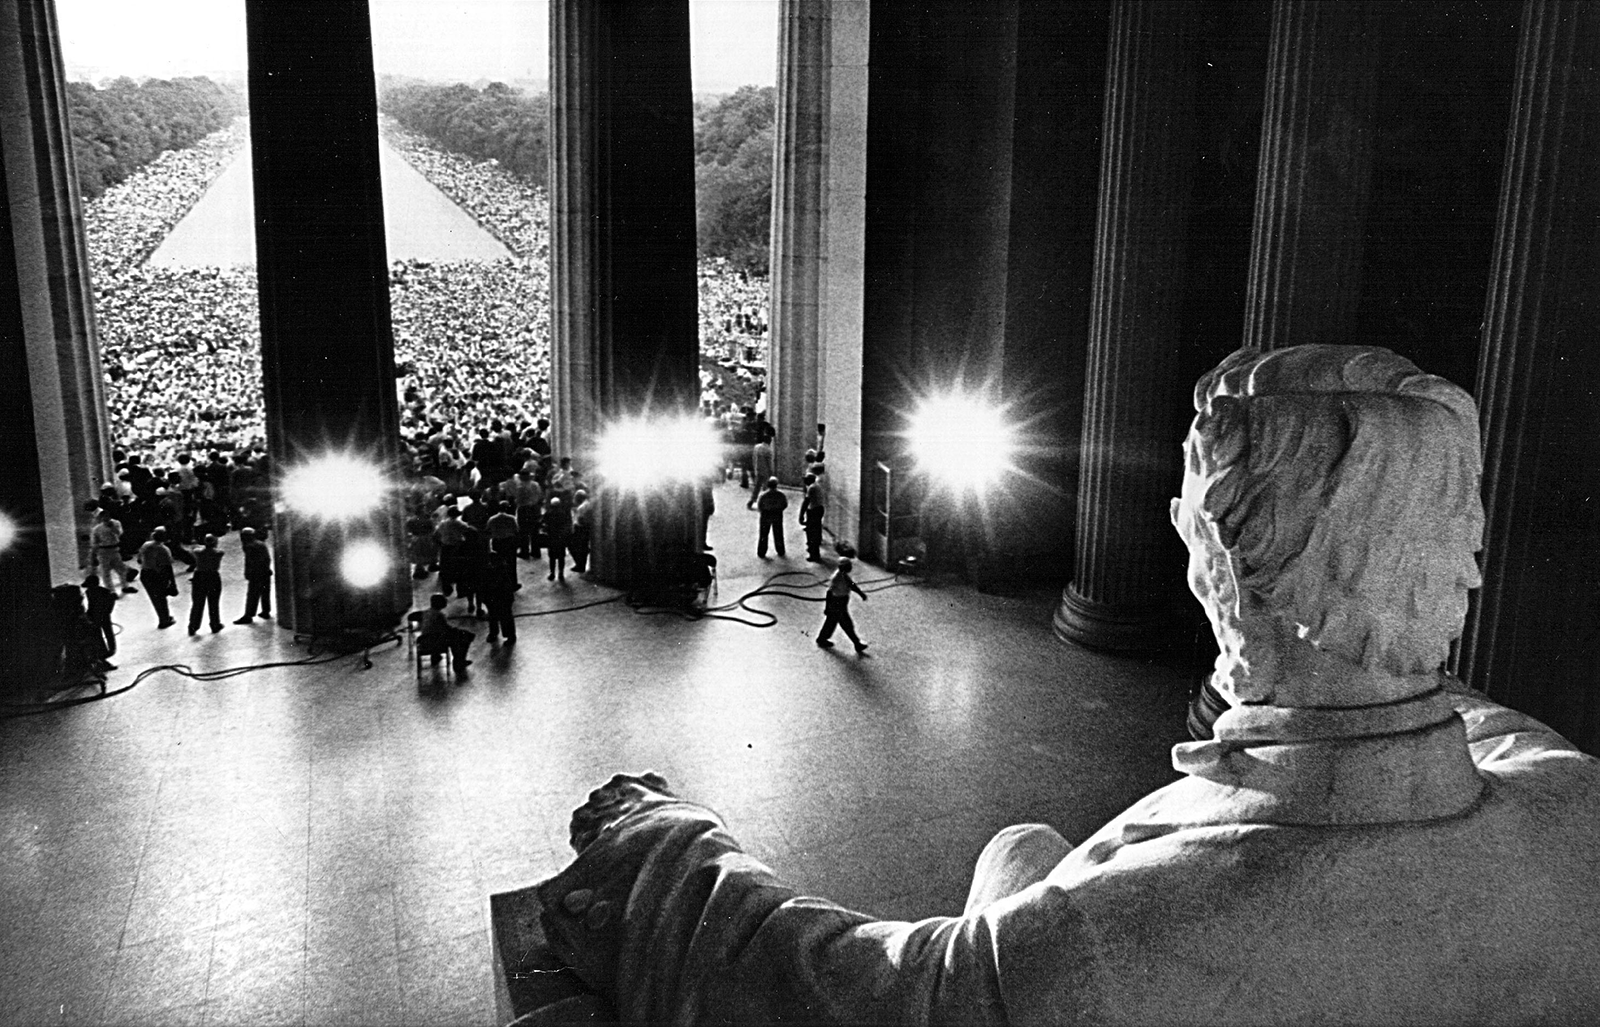 Years of the Lincoln Memorial